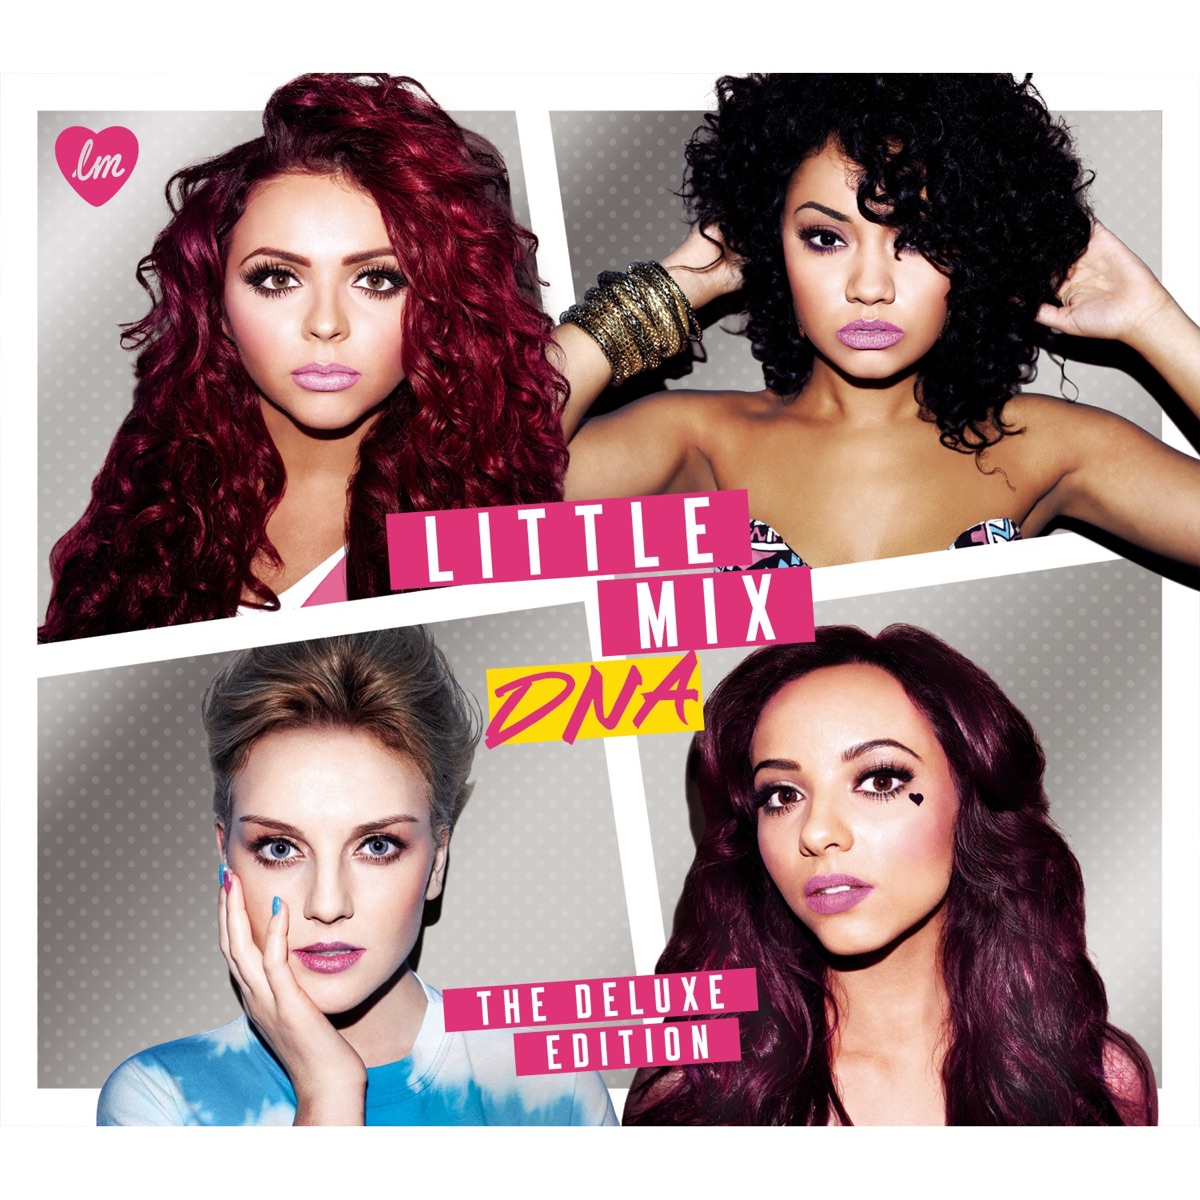 Little Mix release new single Hair featuring Sean Paul